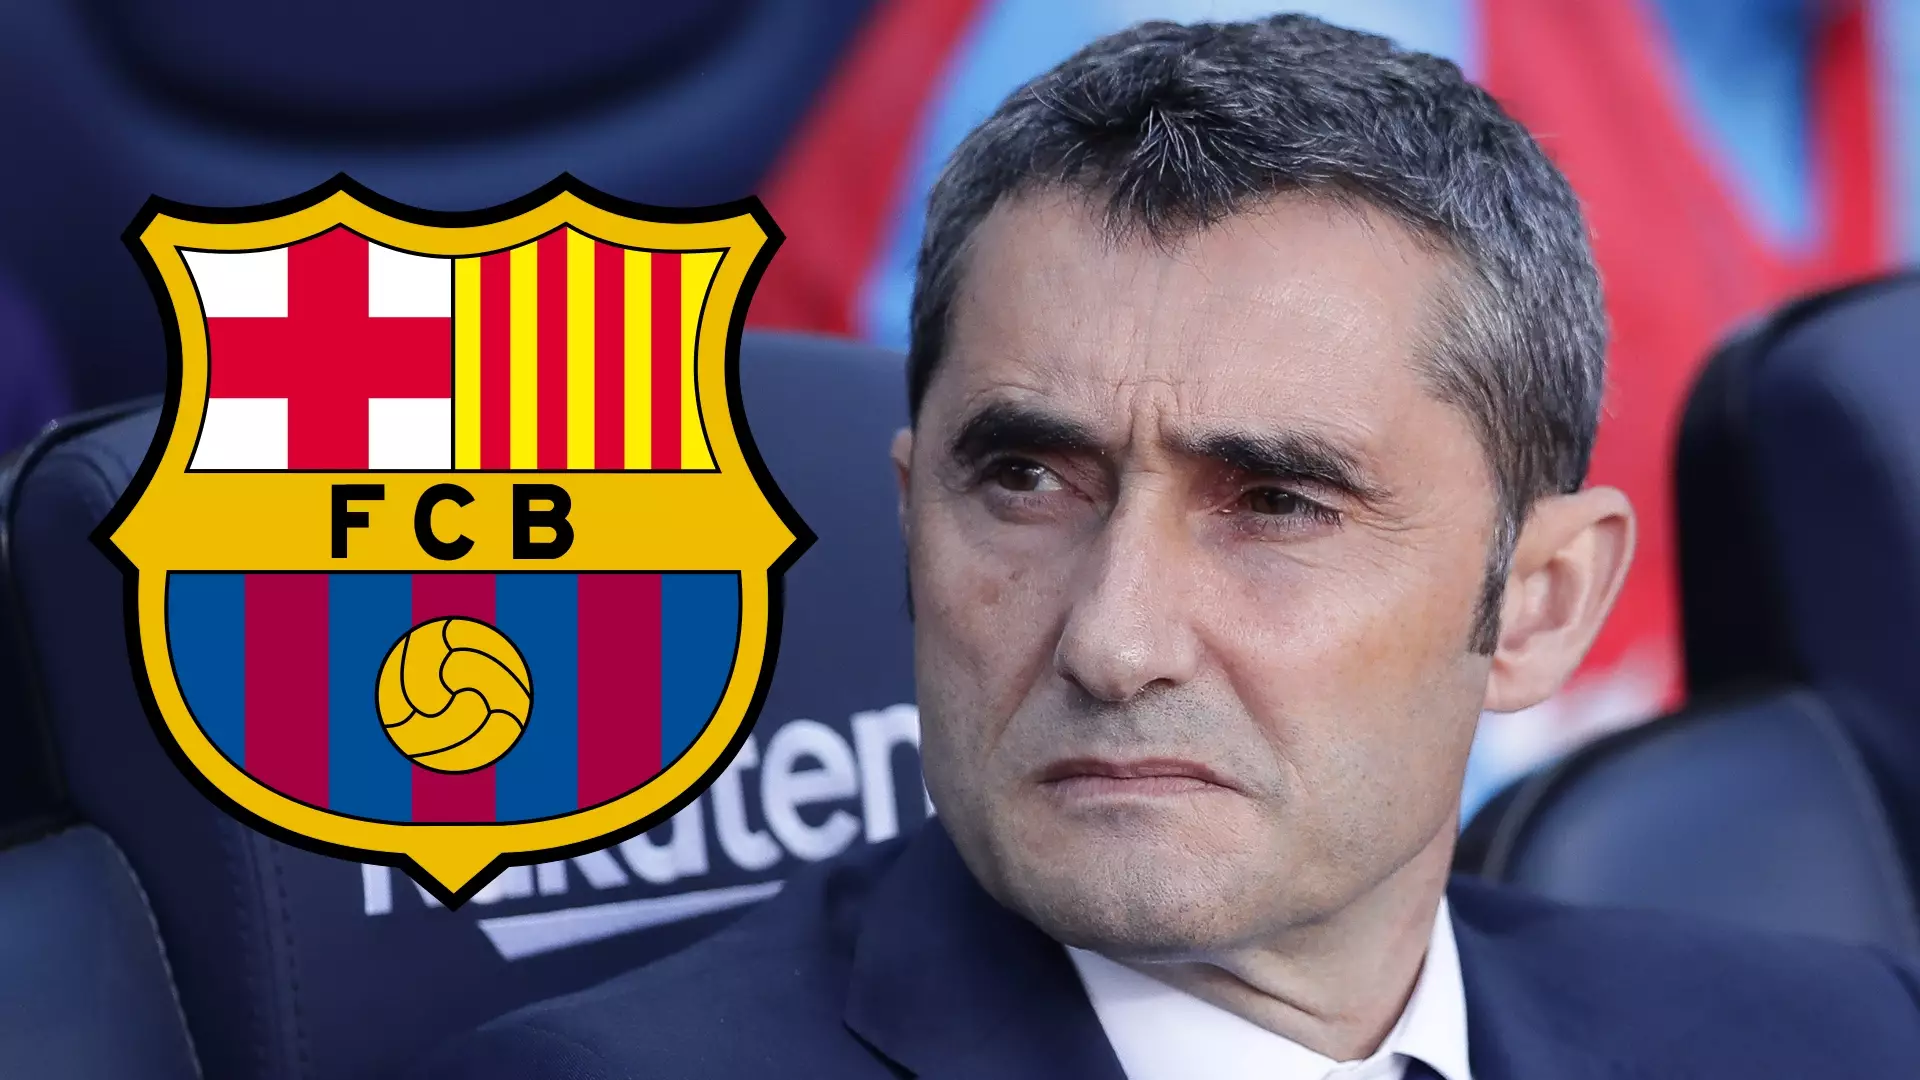 Barcelona Complete The Signing Of Reserve Player And Set His Release Clause At £89m